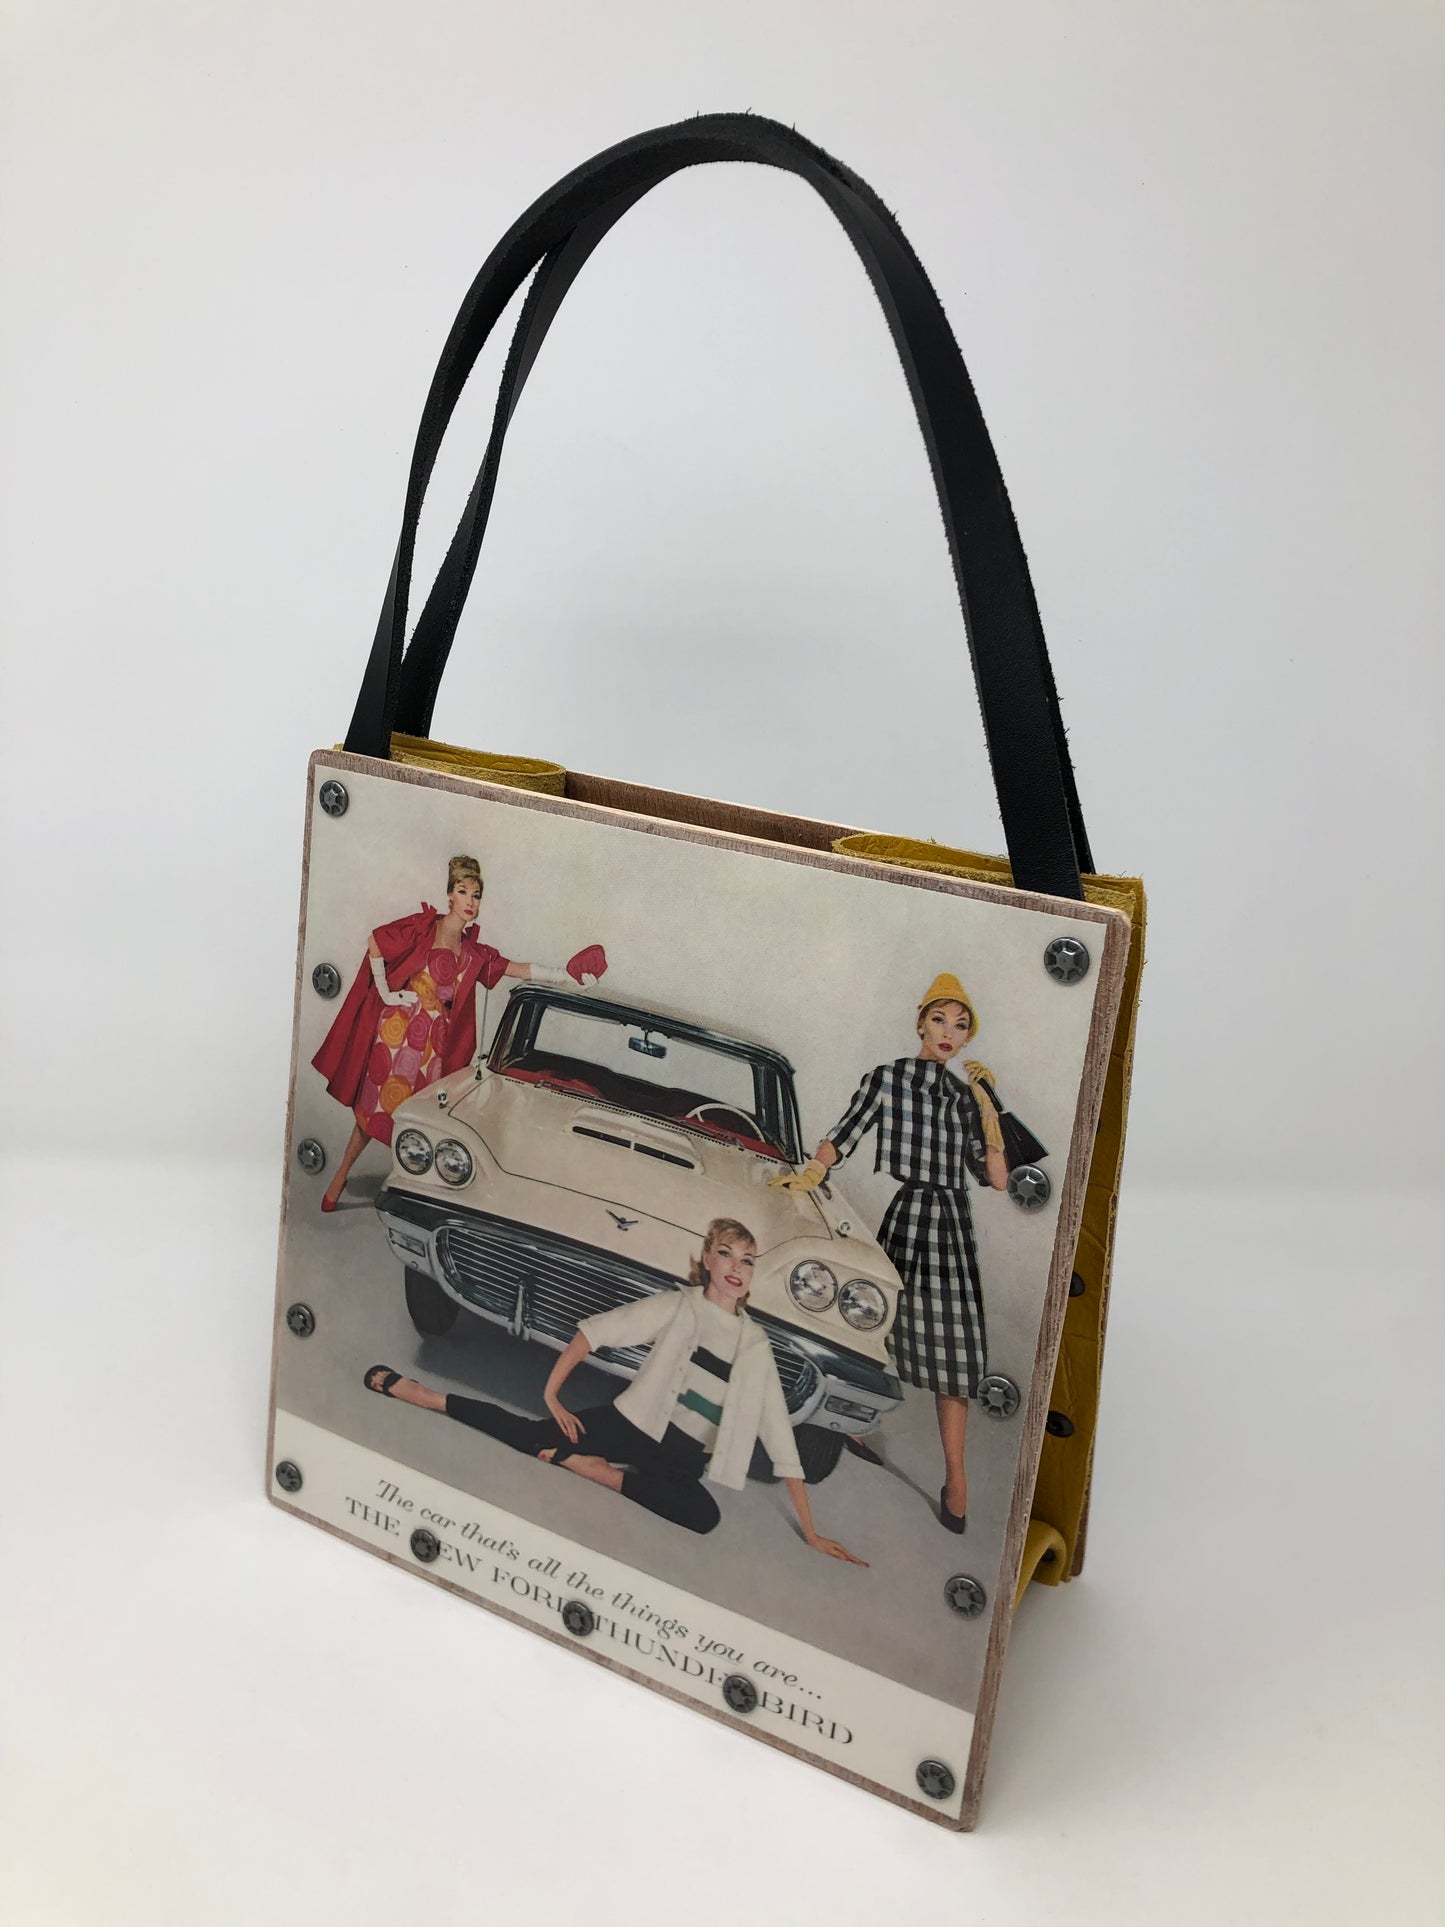 Vintage Graphics Handbag - Ford Thunderbird and Tiffany & Co. Ads from Vogue 1959